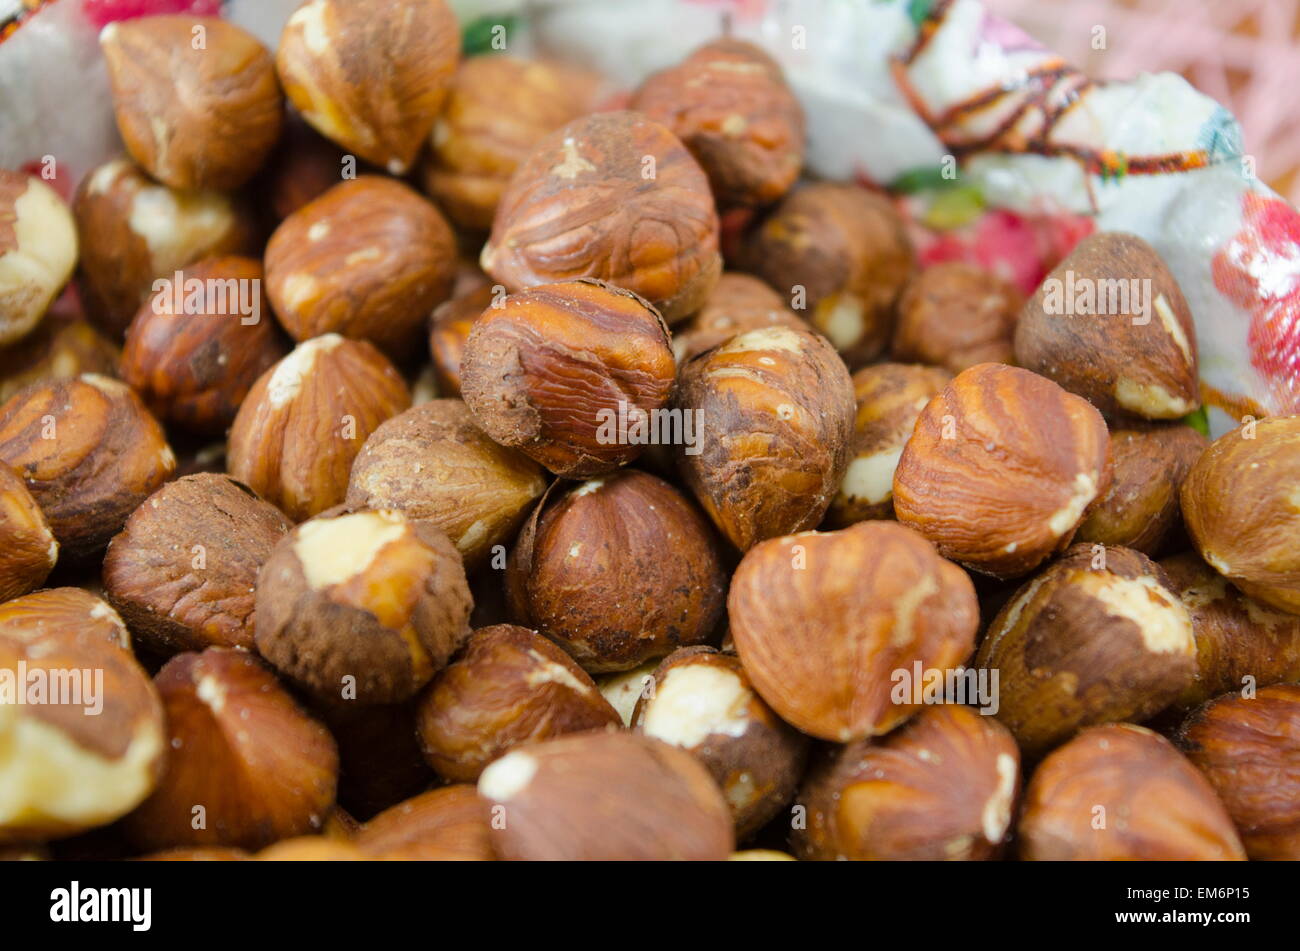 Bunch of raw hazelnuts on a plate Stock Photo